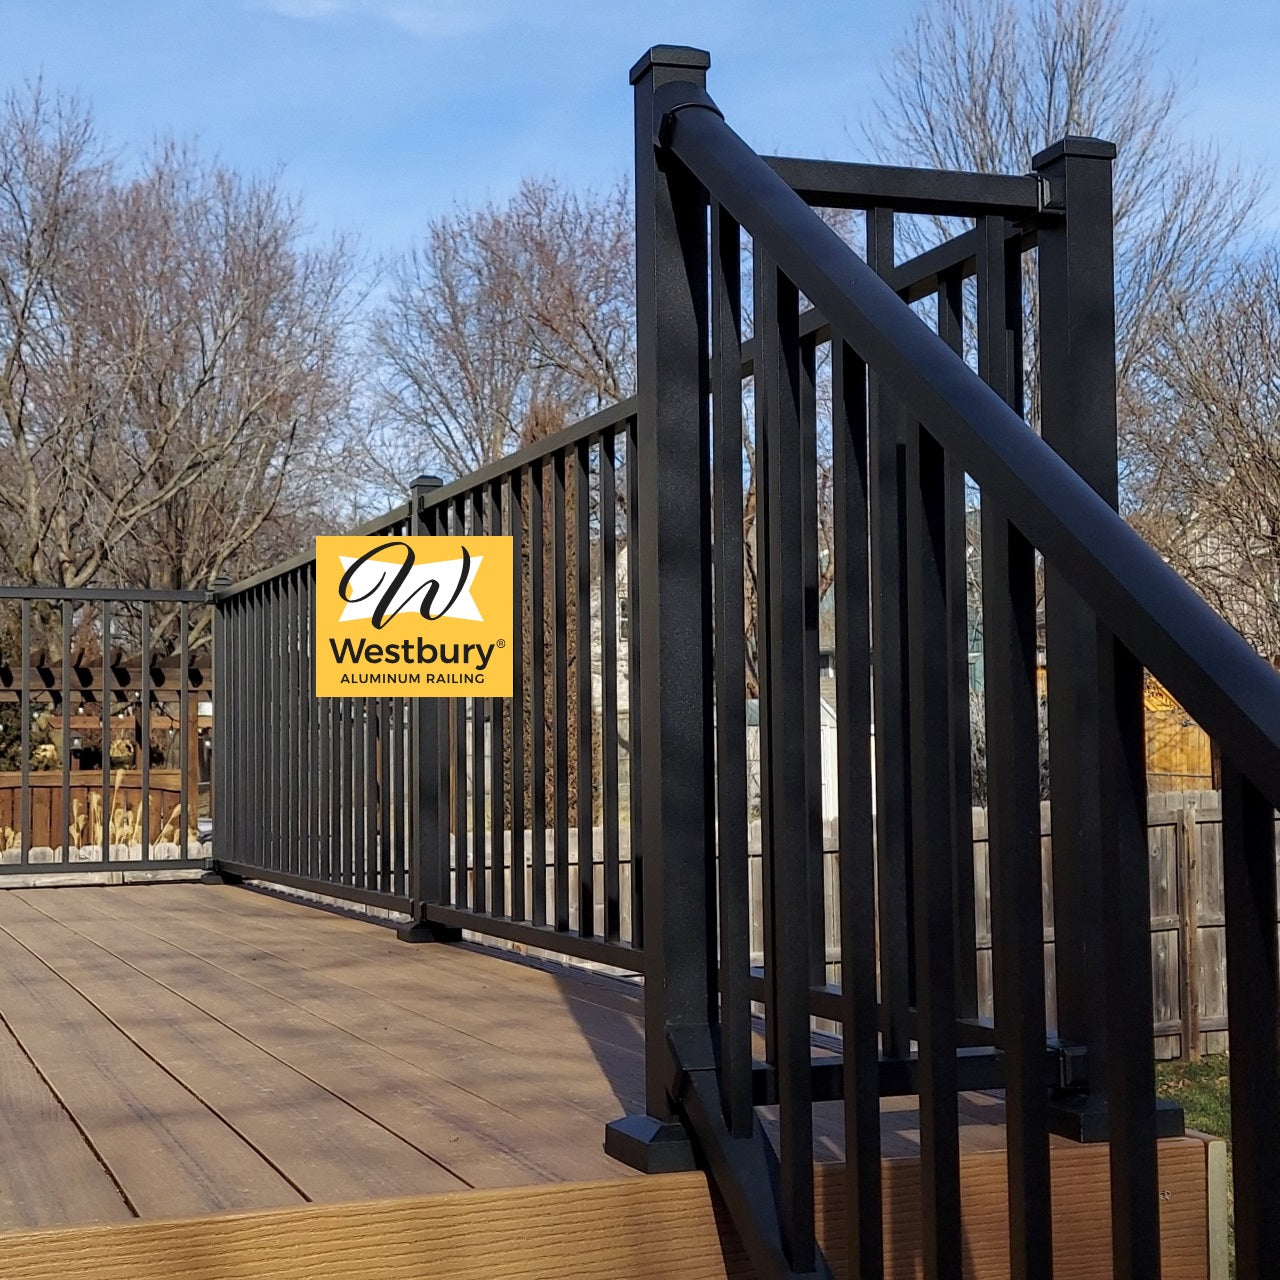 Westbury Aluminum Deck Railing, at top of stair transition to level black fine texture westbury railing an all-aluminum rail system shown in bronze texture with two inch posts atop a composite deck. 